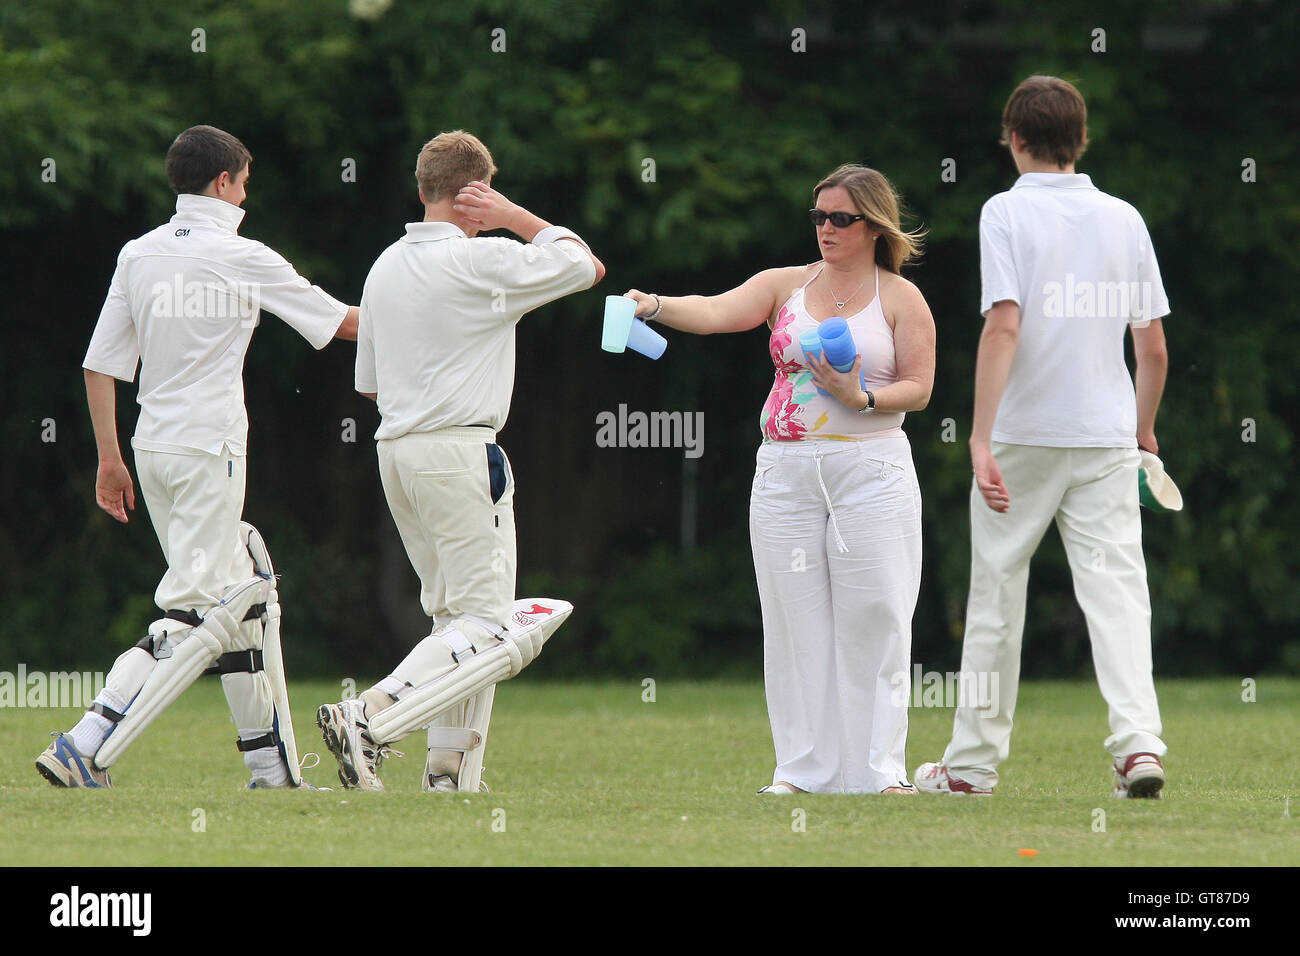 Drinks are served - Havering-Atte-Bower CC 3rd XI vs Galleywood CC 2nd XI - Mid-Essex Cricket League - 05/06/10 Stock Photo